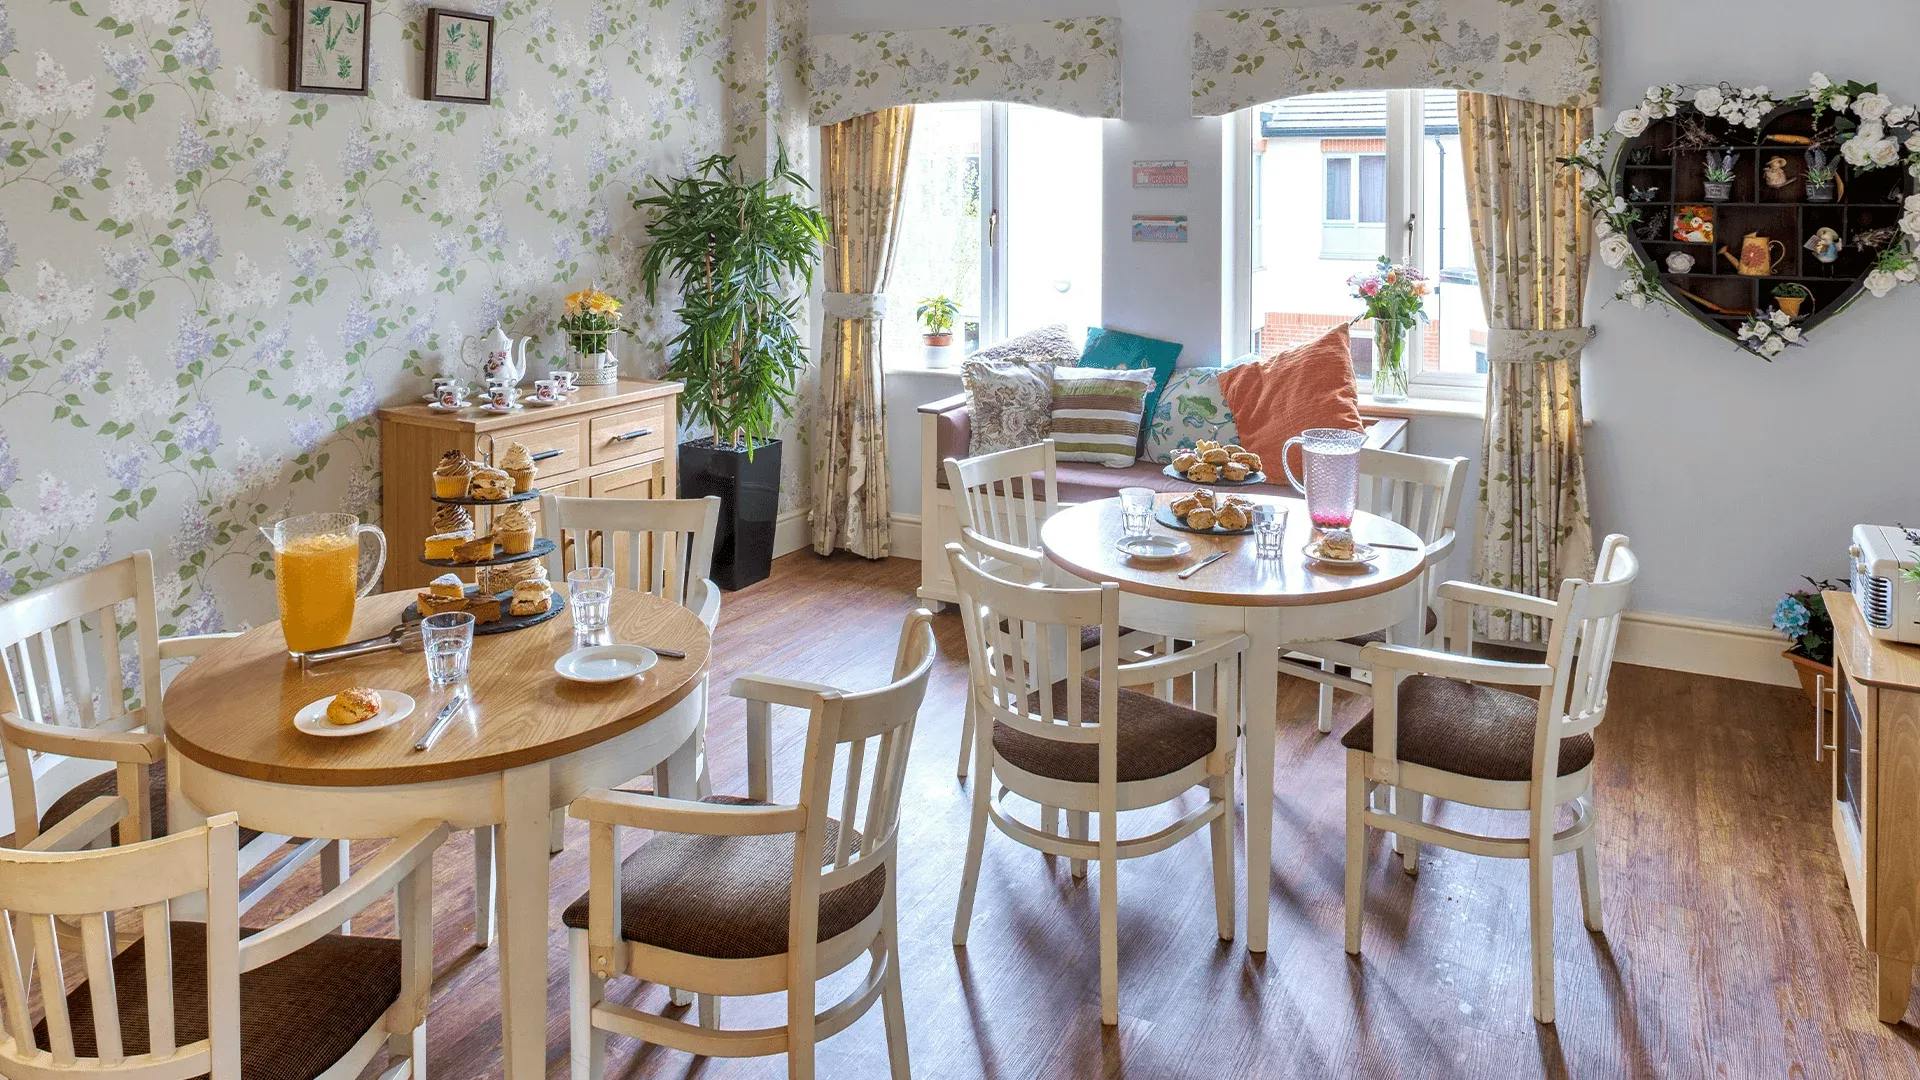 The dining area at Newcross Care Home in Wolverhampton, West Midlands